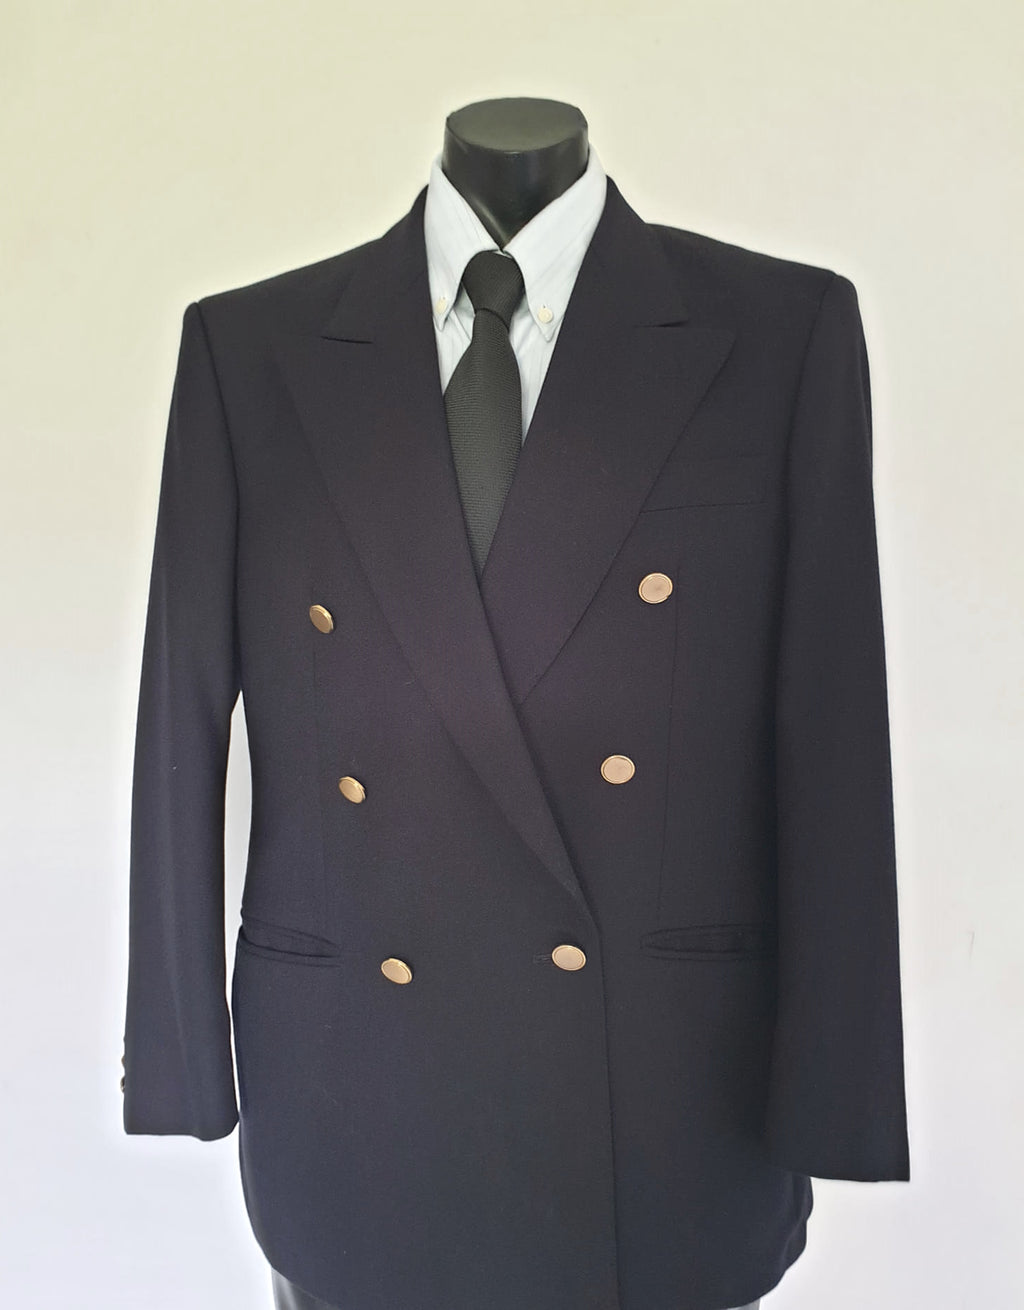 navy black double breasted wool jacket by marks & Spencer size 38S